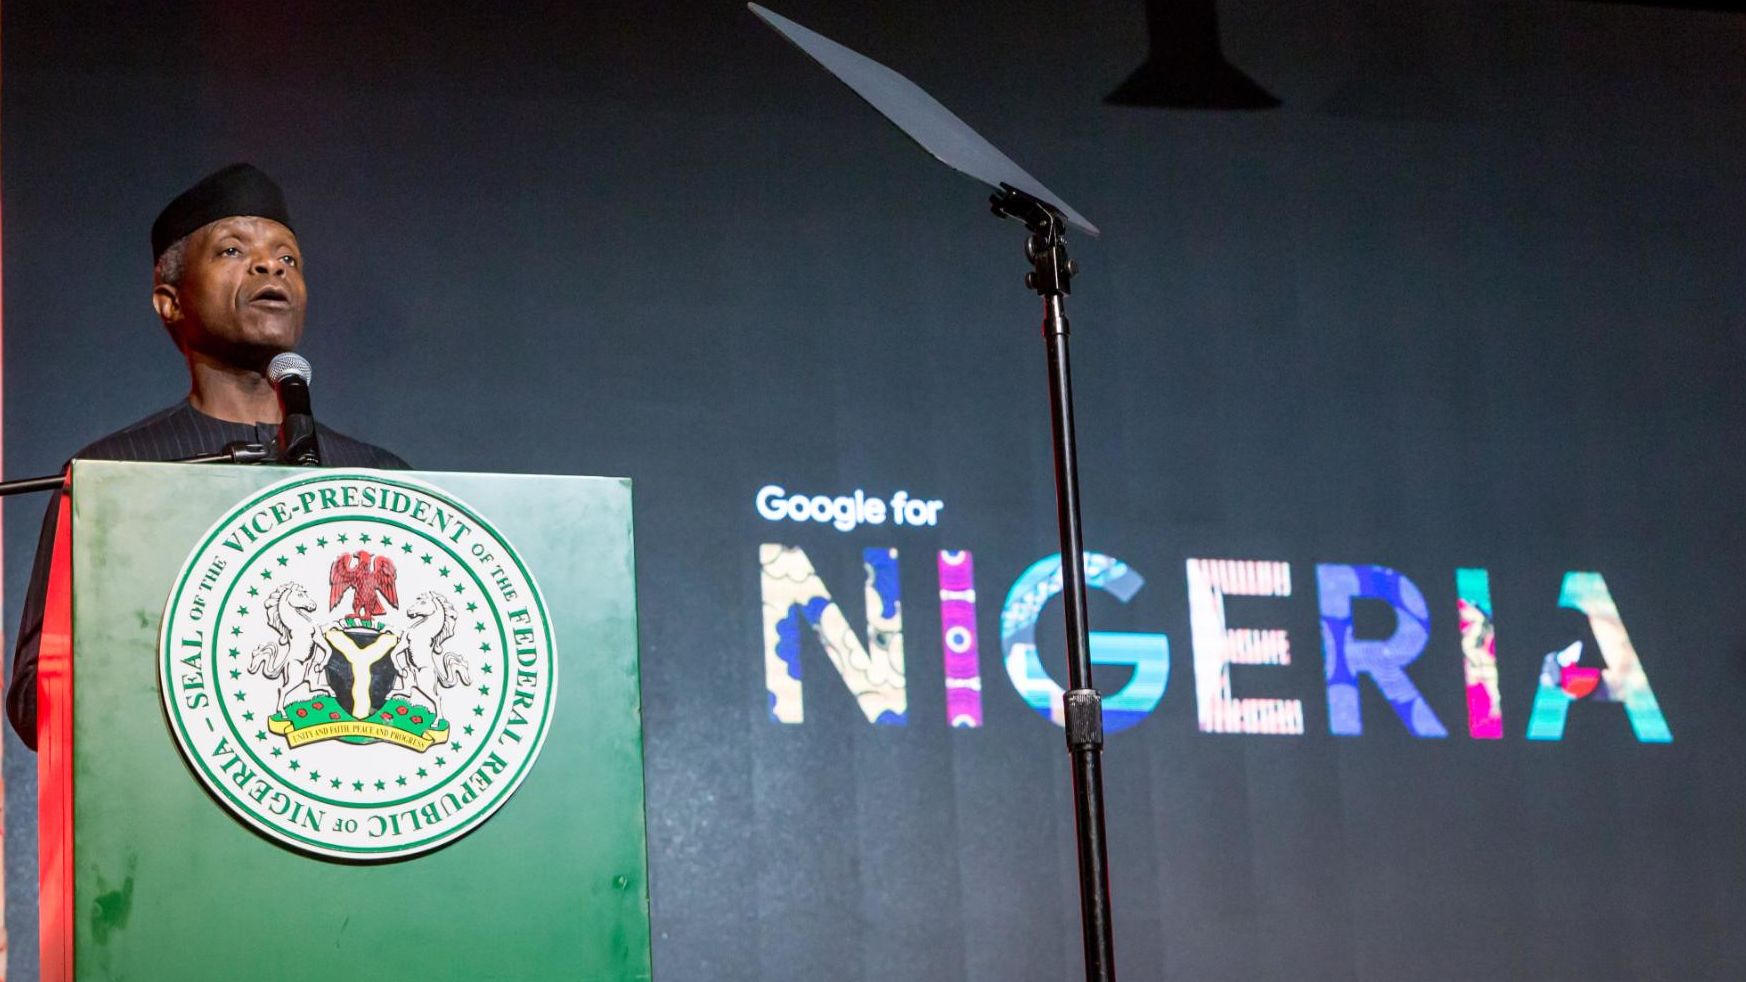 Nigeria's vice president Prof Yemi Osinbajo at the launch of Google Station 'fast Wi-Fi for everyone' initiative in Nigeria on Thursday, July 26, 2018.